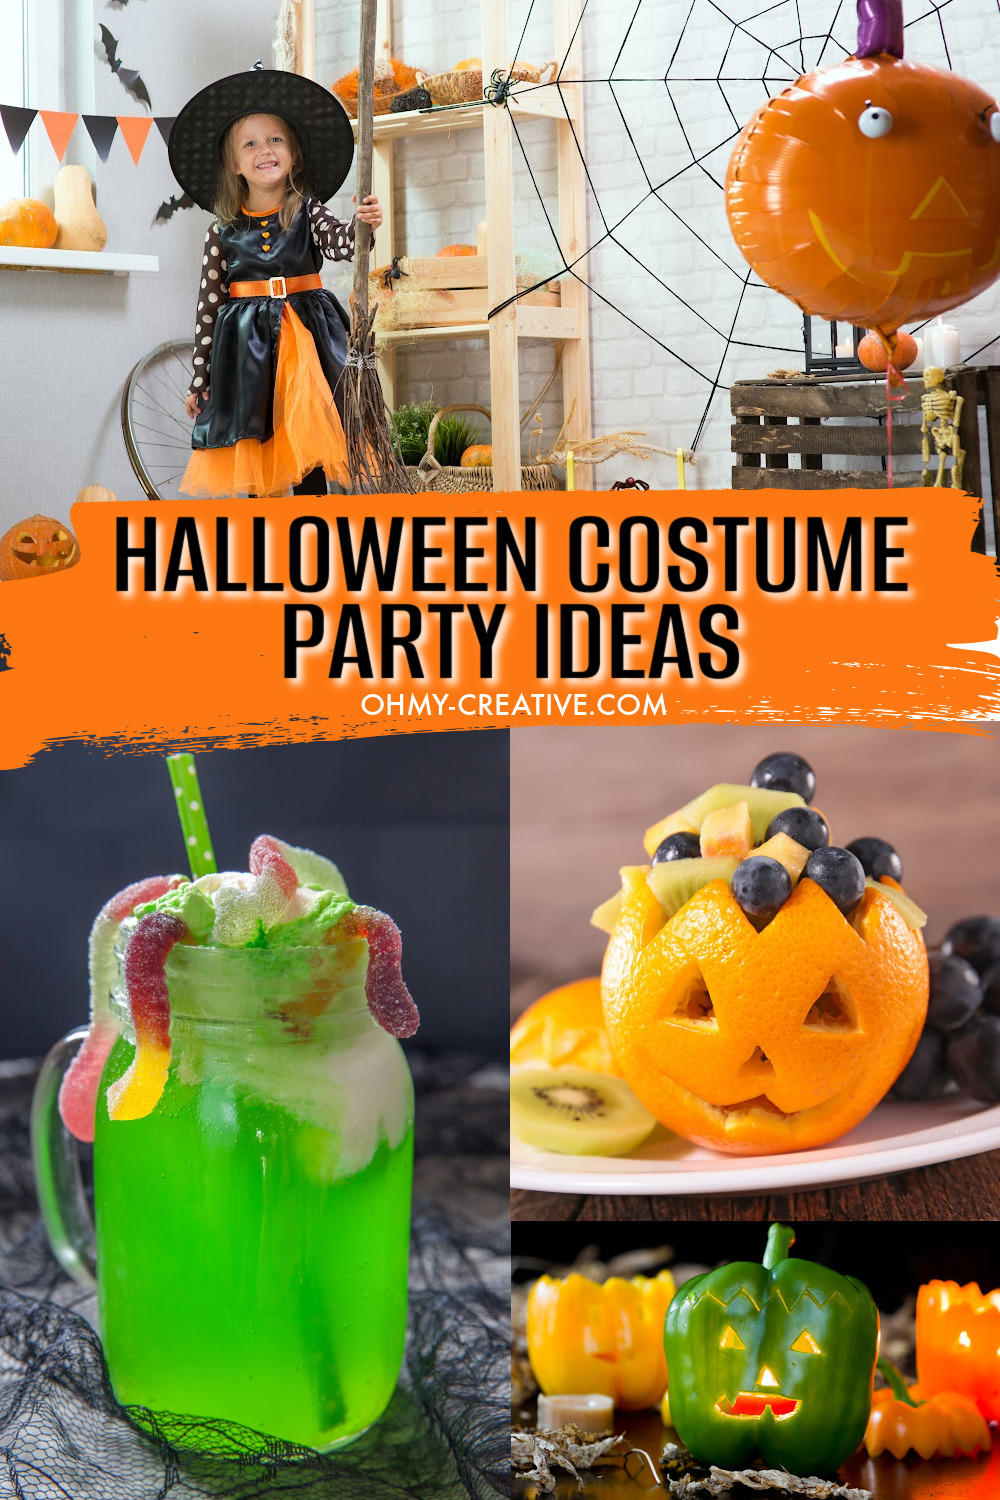 A collage of Kids Halloween costume party ideas including a girl dressed as a witch with Halloween decorations, a green drink with gummy worms, an orange turned into a pumpkin and pumpkin green peppers.